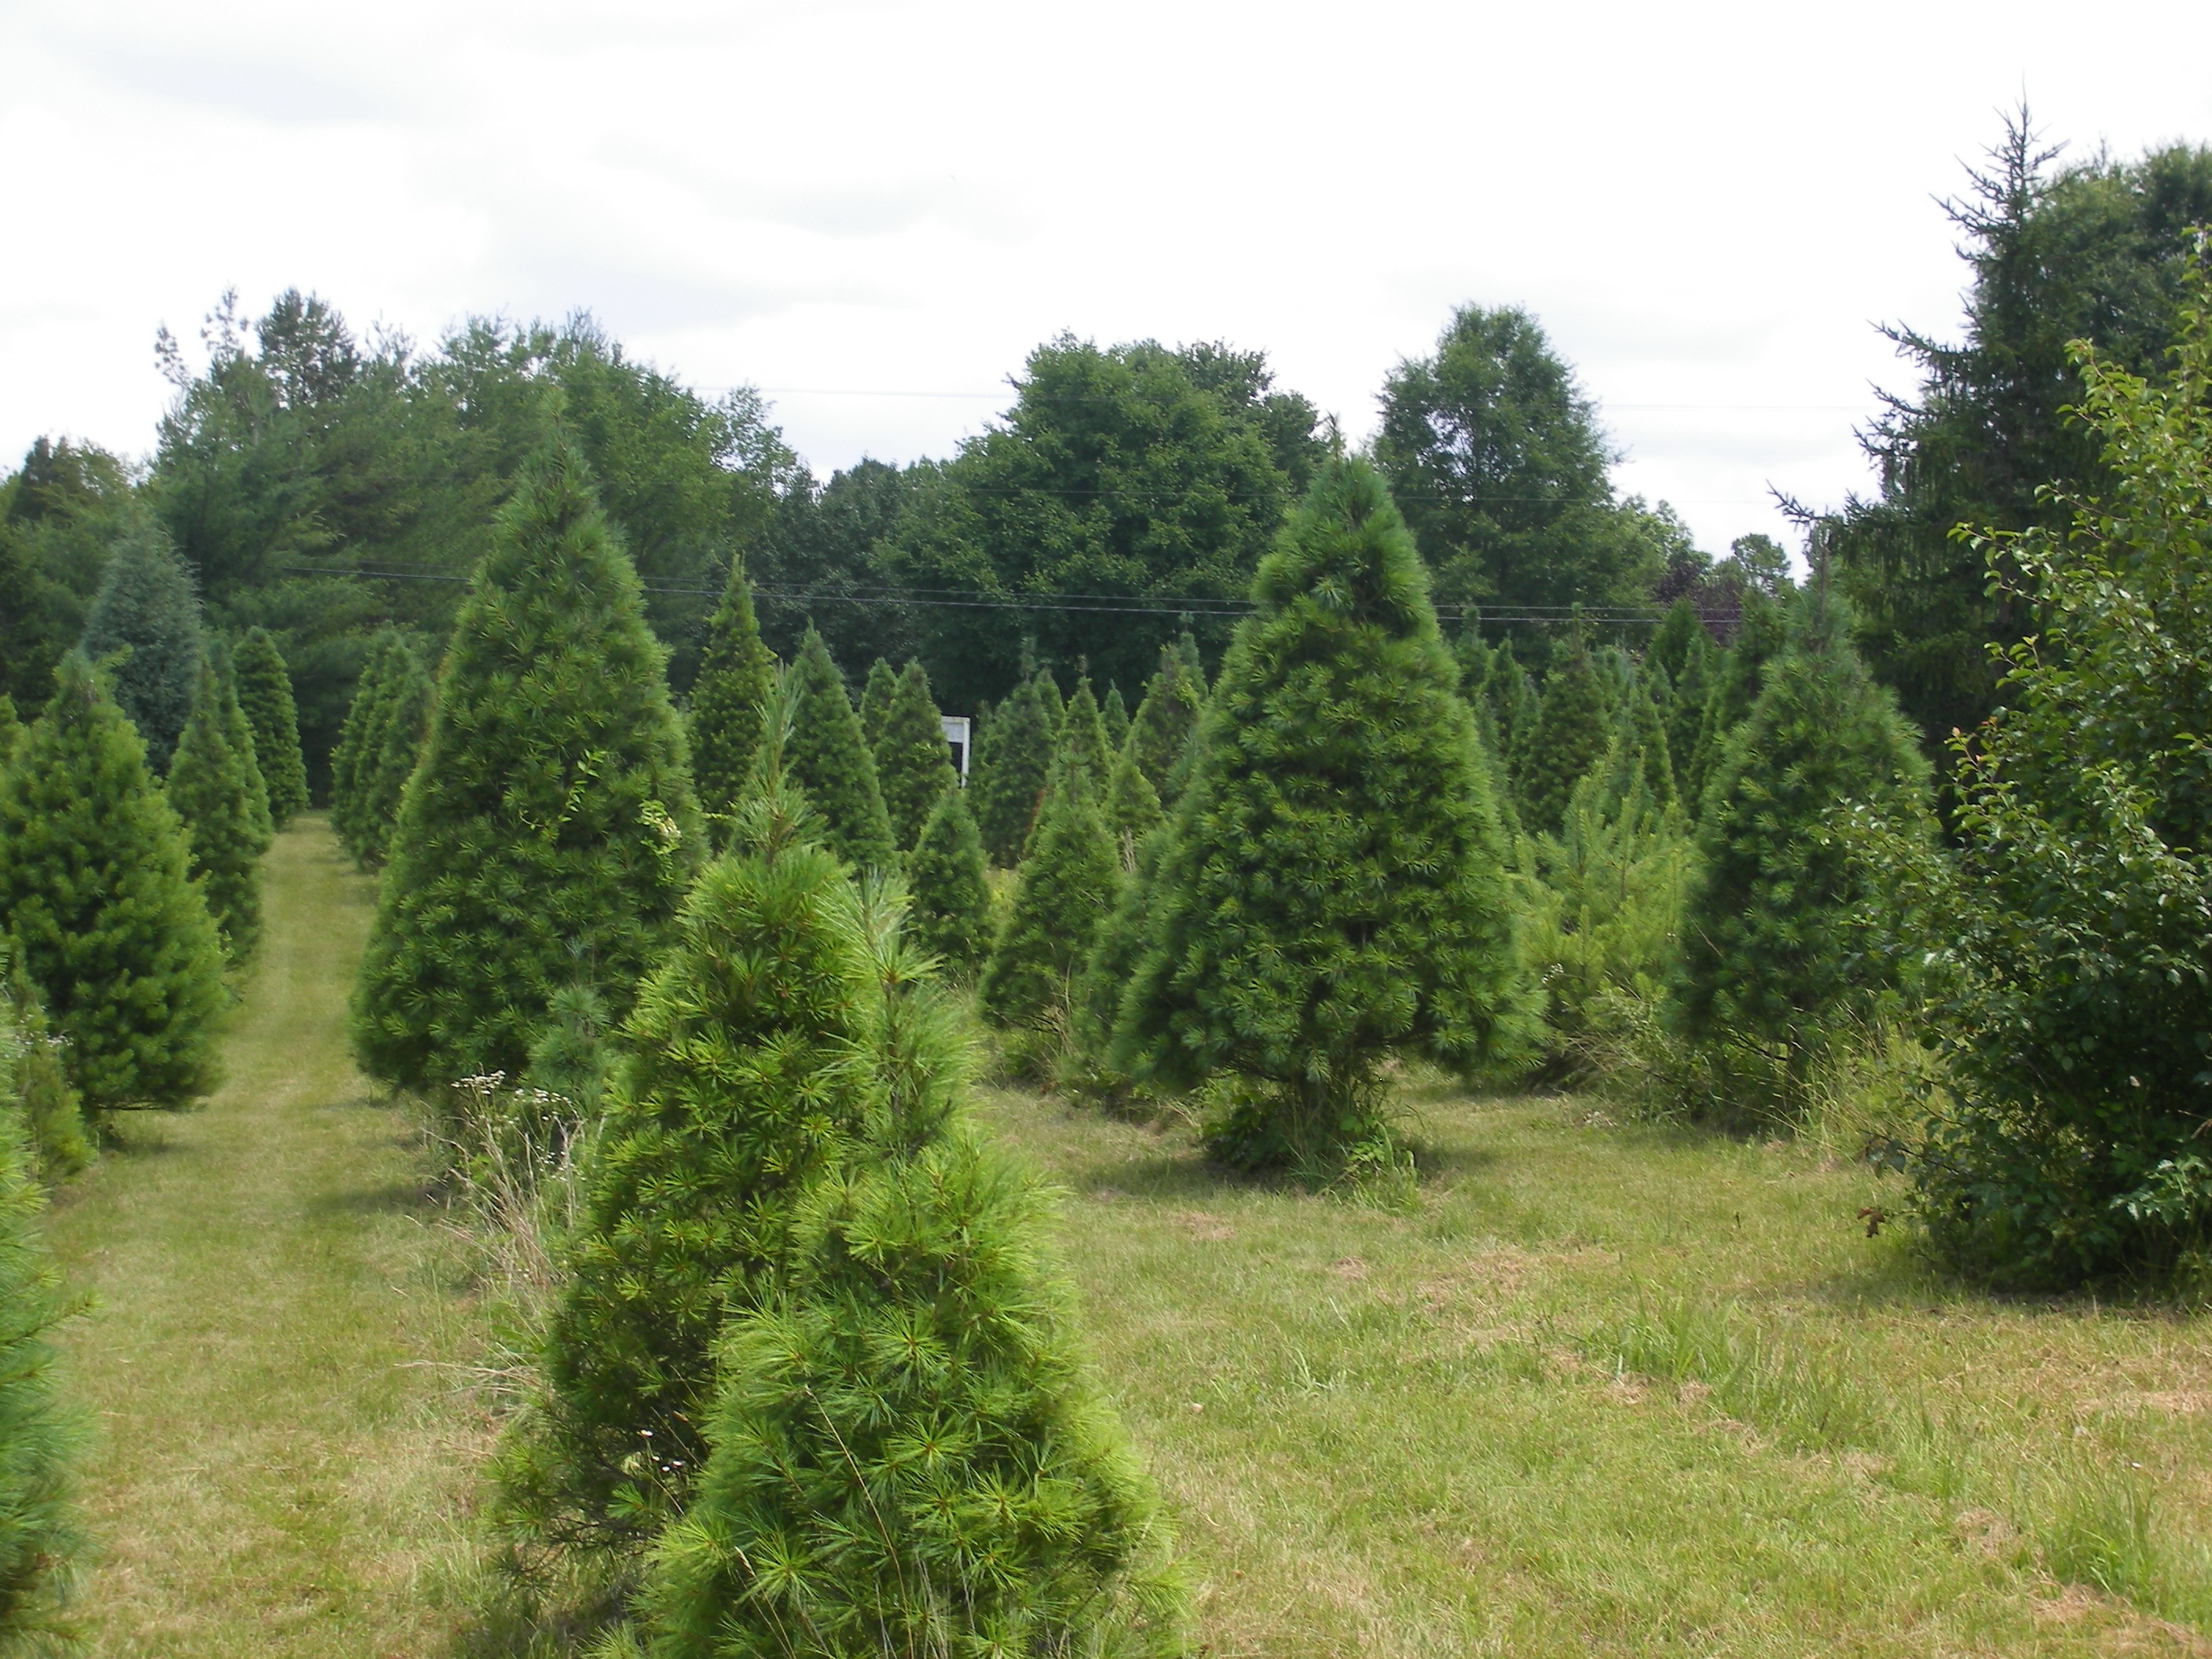 Pine Top Farm Christmas Trees and Blueberry Picking